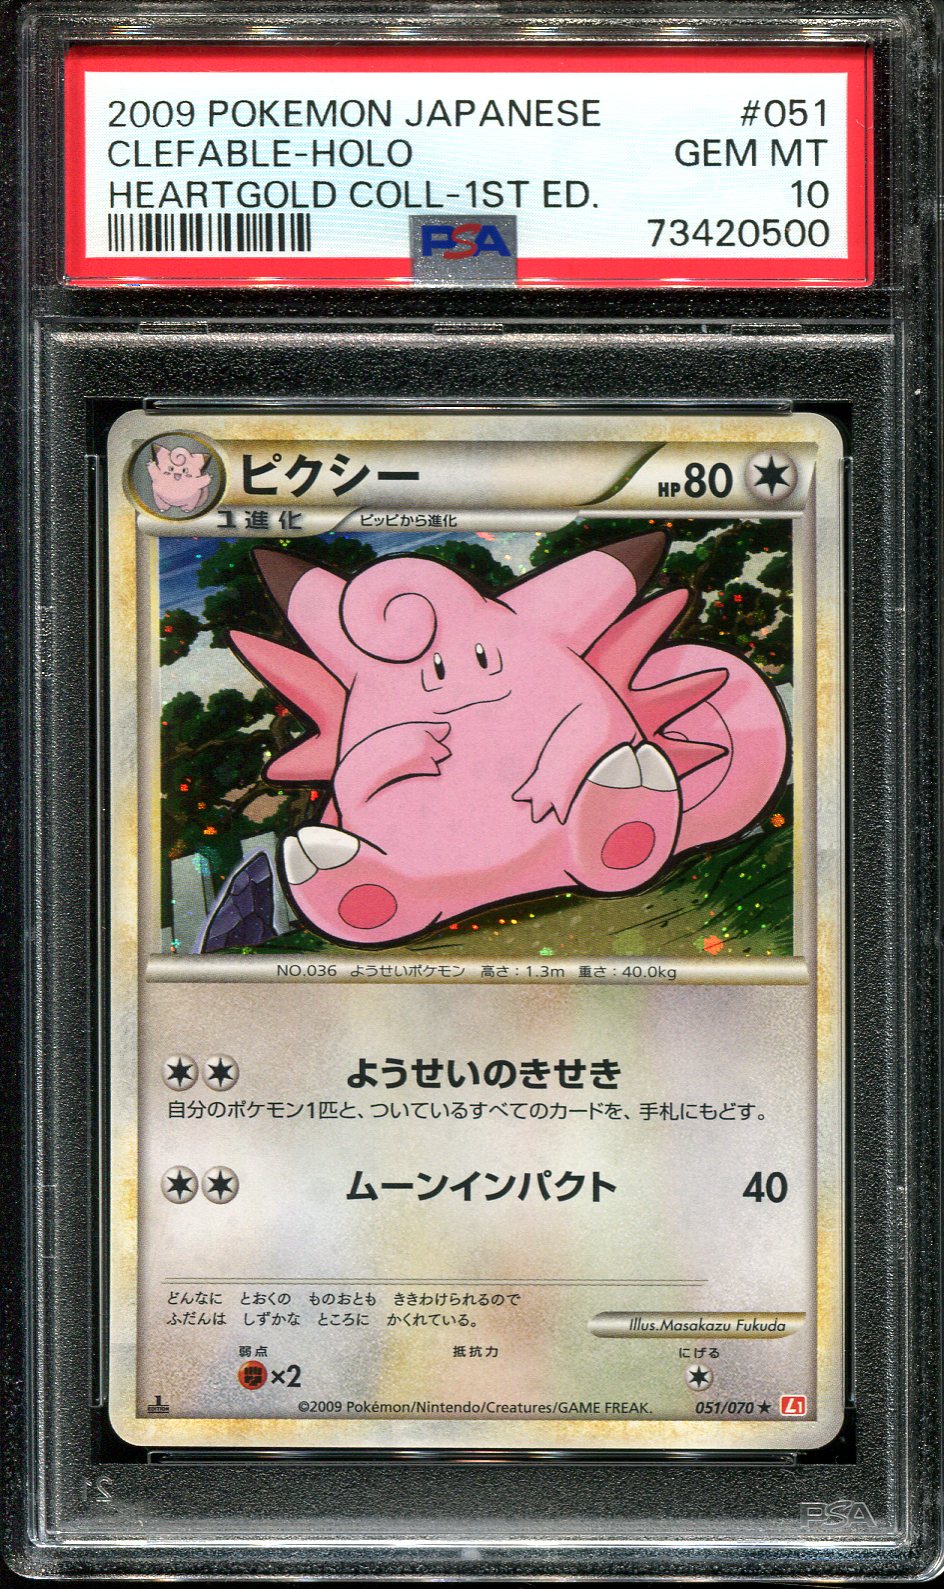 CLEFABLE 051/070 PSA 10 POKEMON HEARTGOLD COLLECTION JAPANESE HOLO